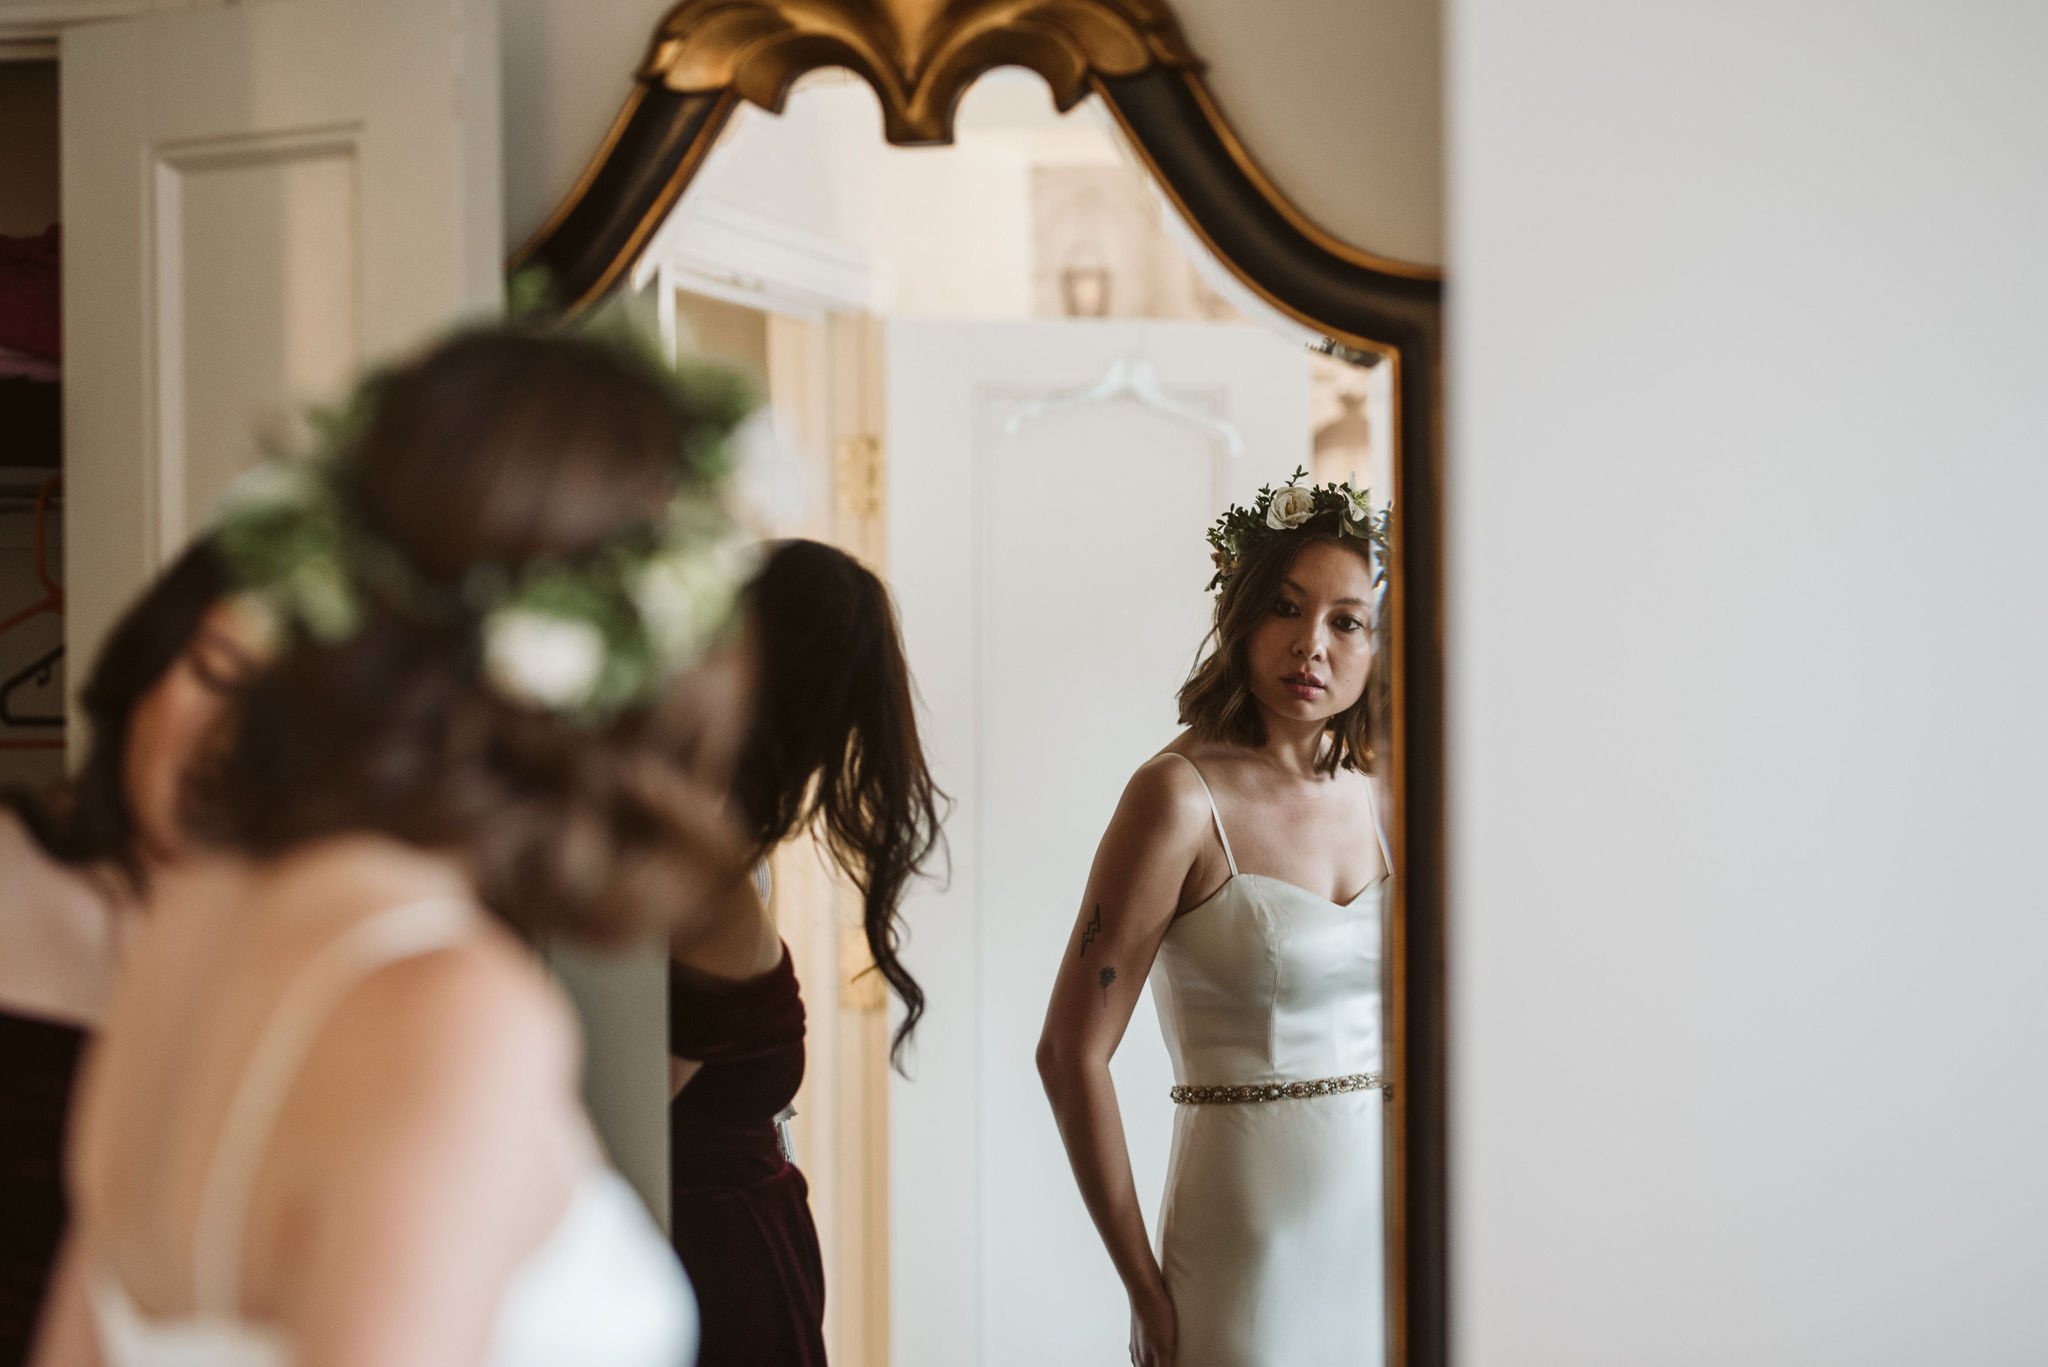  Washington DC, Baltimore Wedding Photographer, Alexandria, Old Town, Jewel Tone, Romantic, Modern, The Alexandrian Autograph Collection Hotel, Bride getting ready in the mirror 